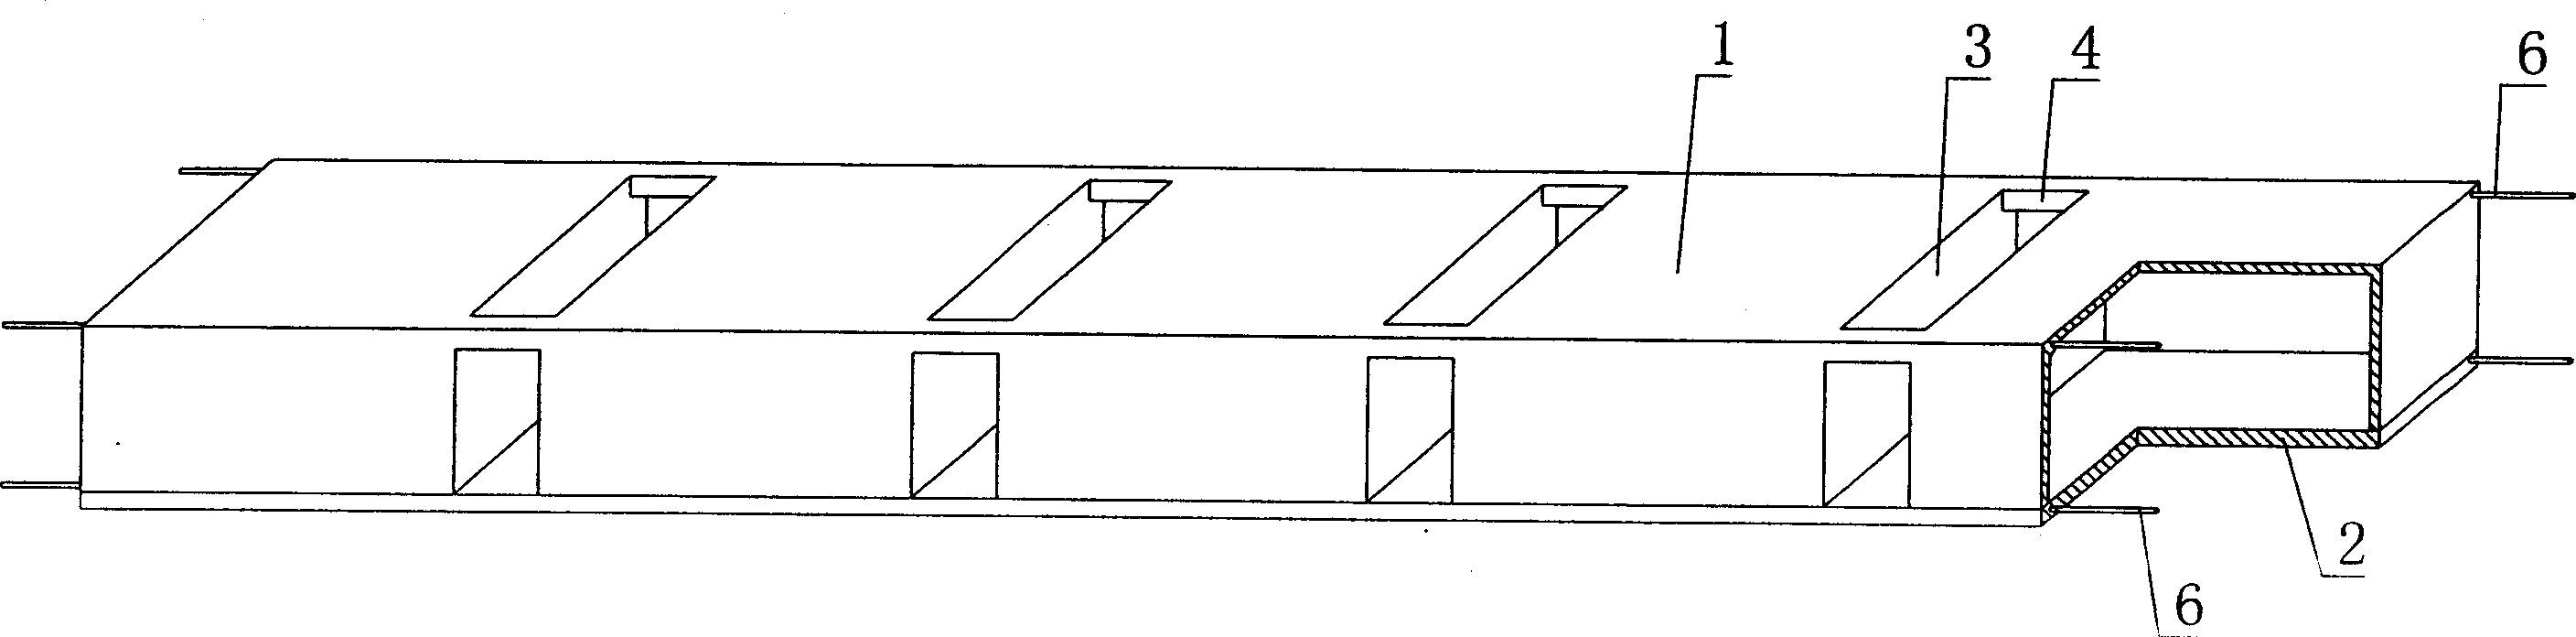 Cavity structural member for hollow board